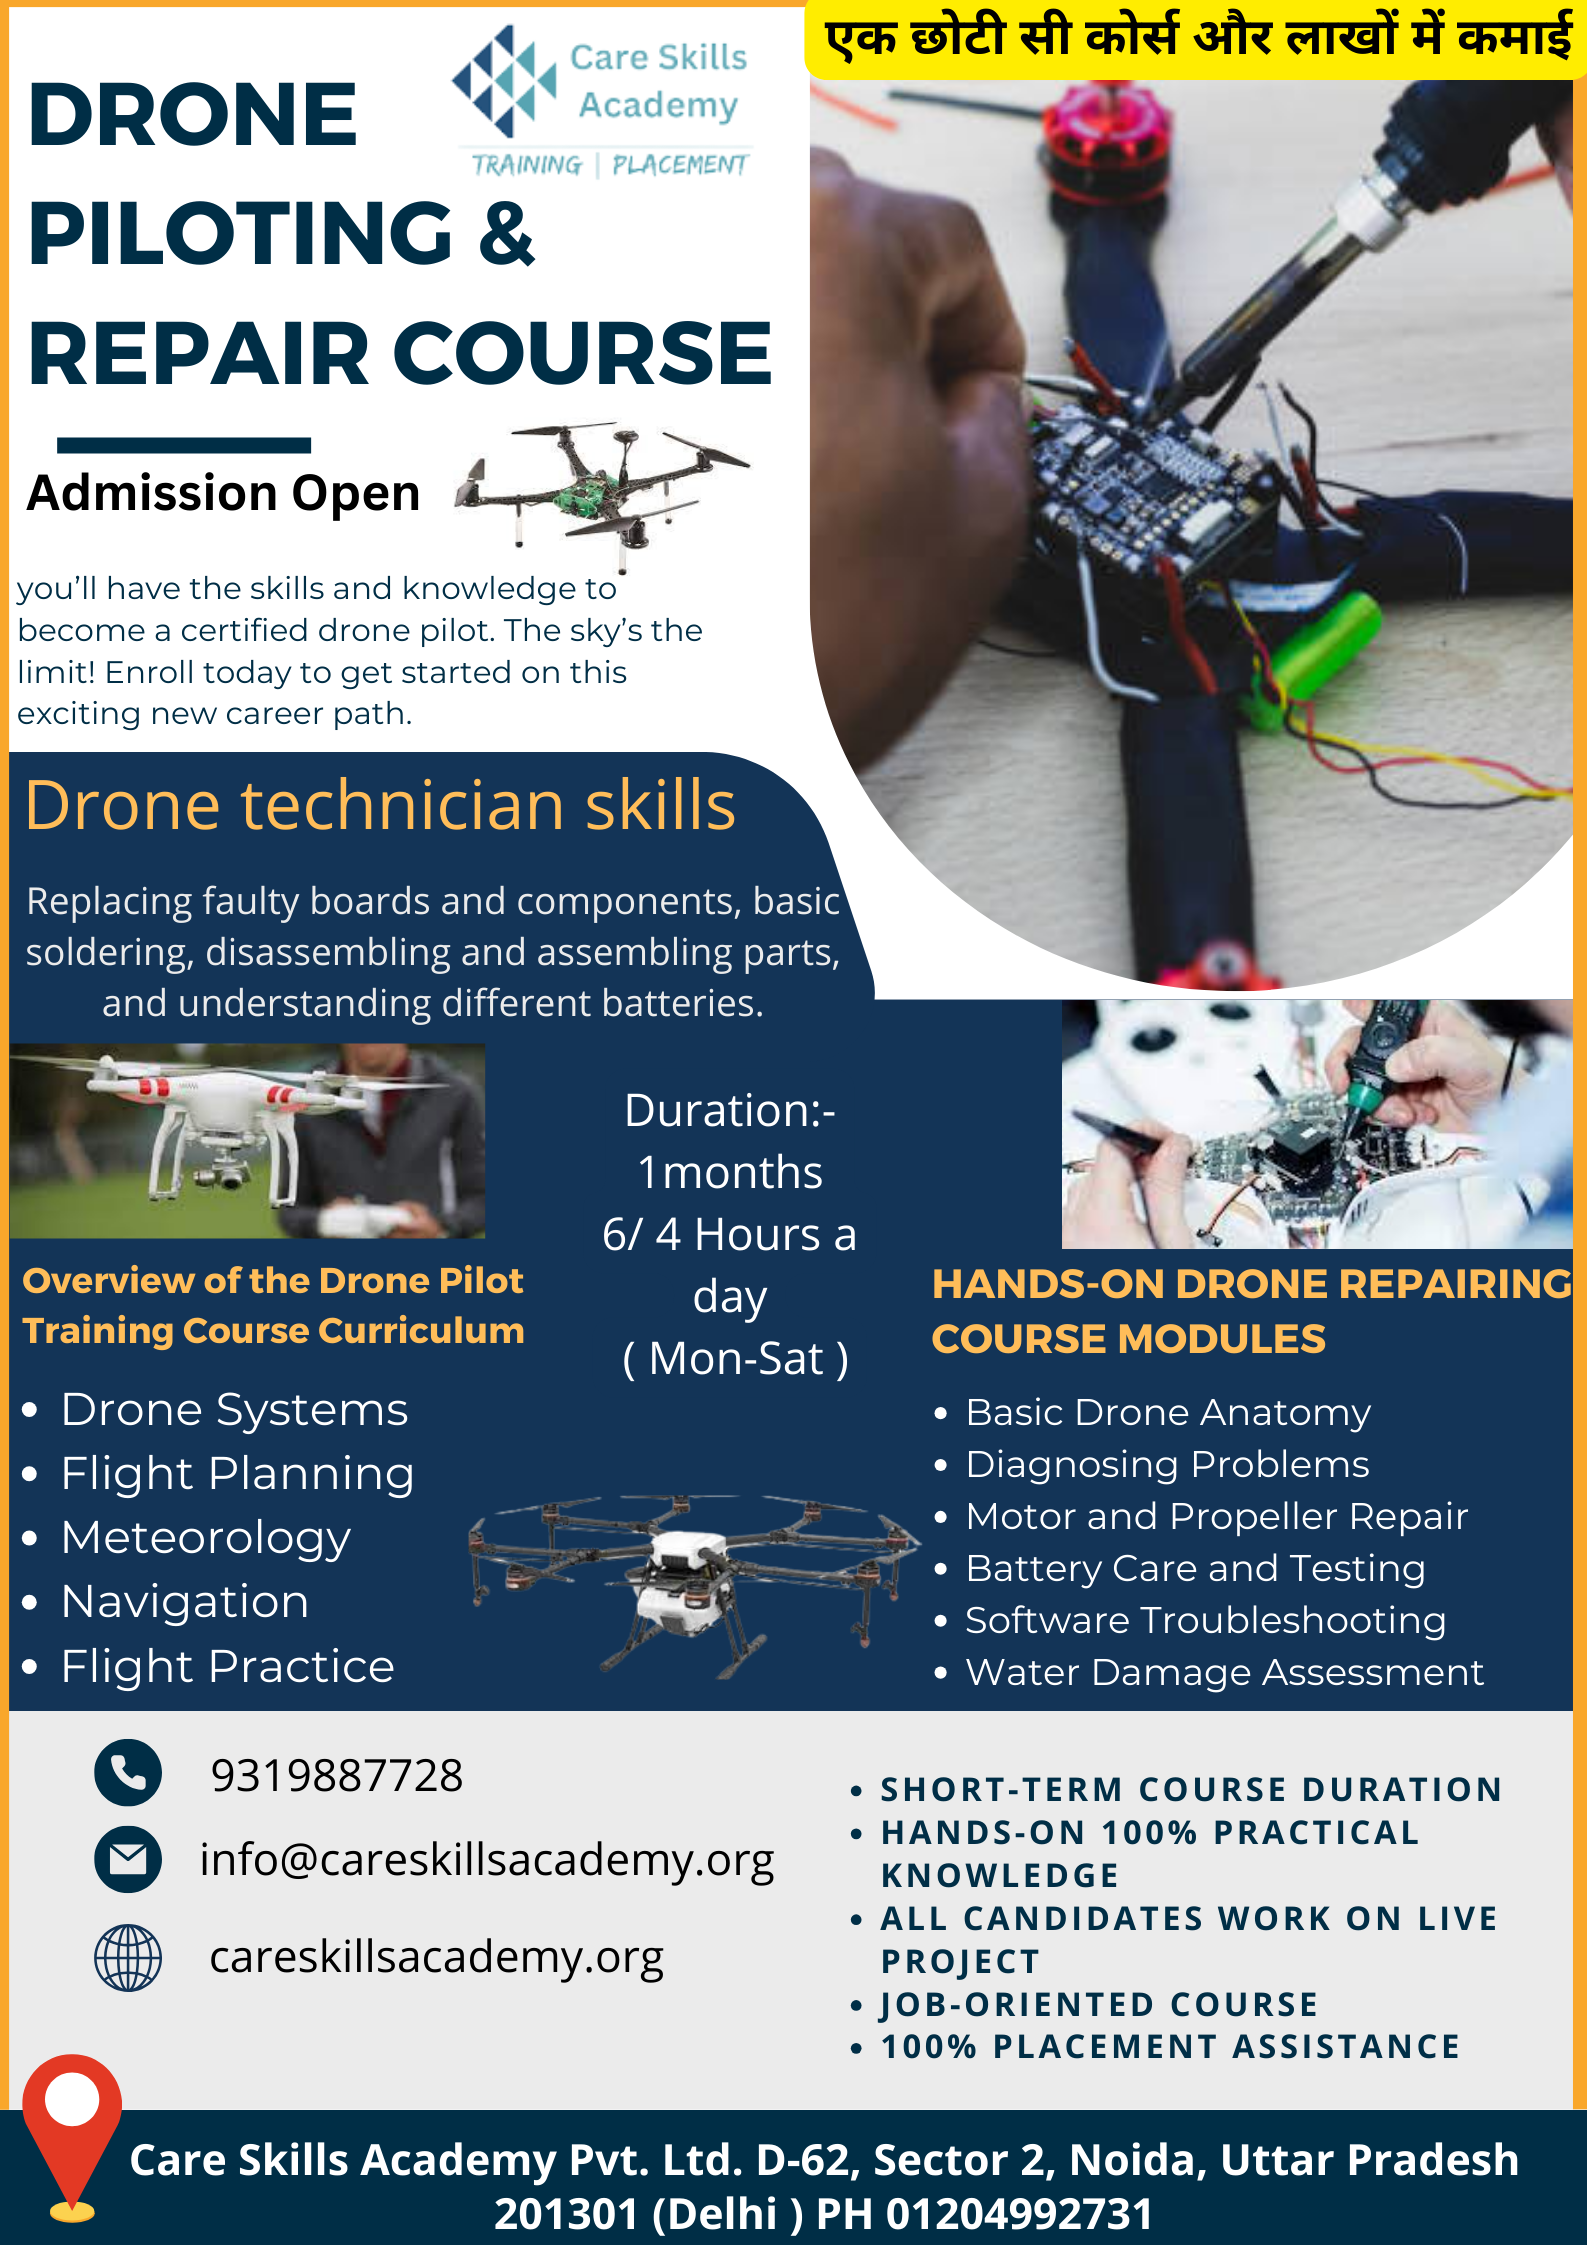 Become a Drone Mechanic With Care Skills Academy’s Repair Course